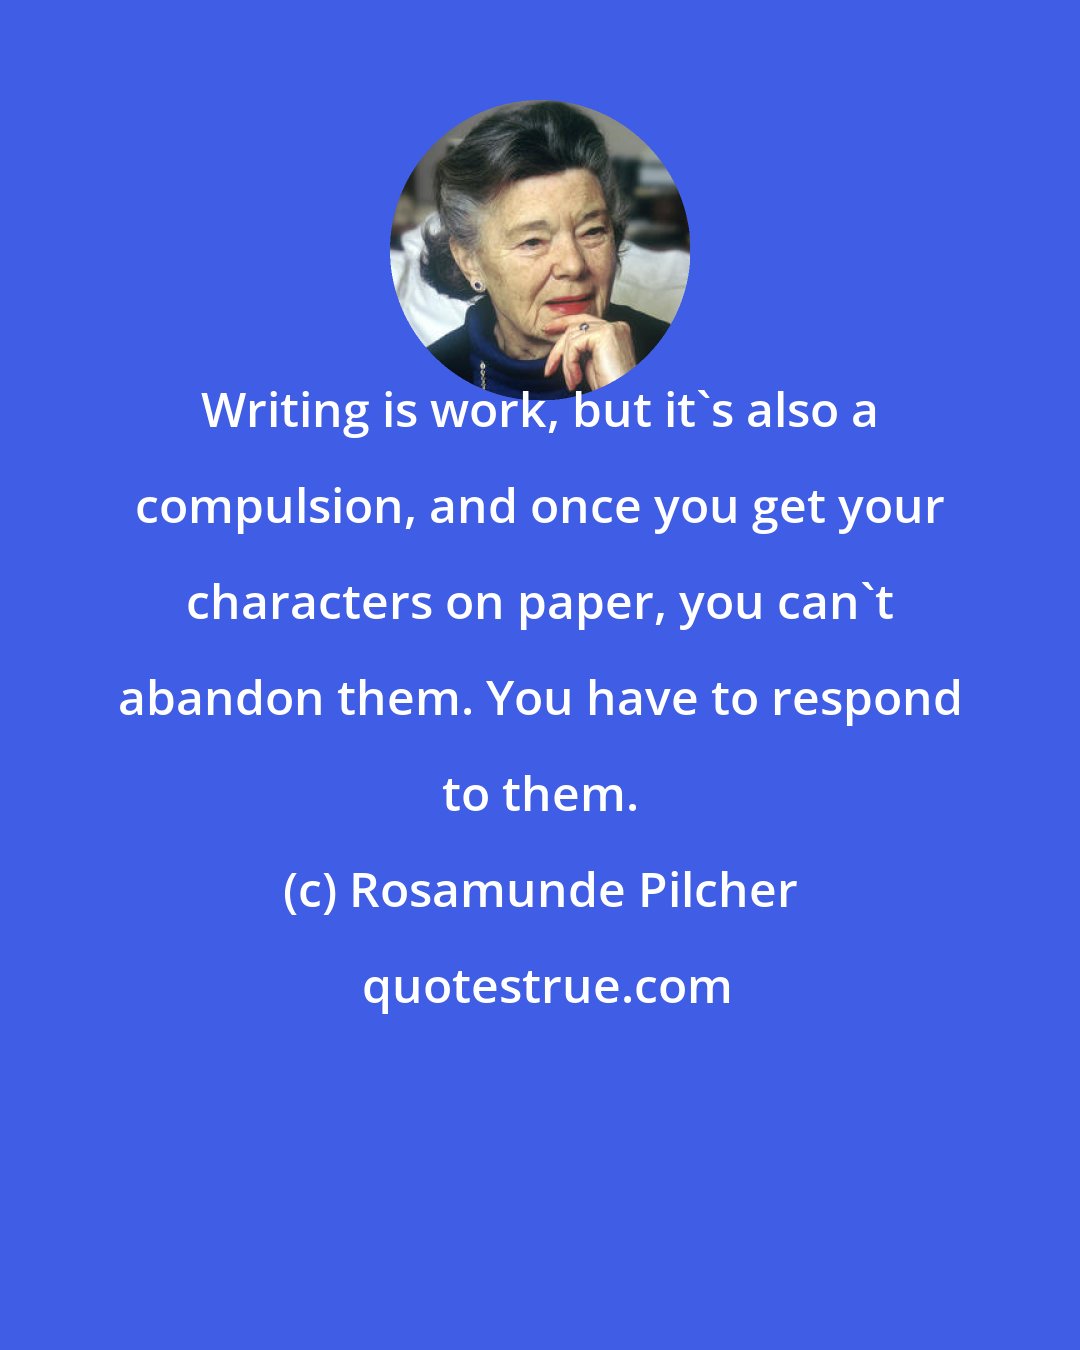 Rosamunde Pilcher: Writing is work, but it's also a compulsion, and once you get your characters on paper, you can't abandon them. You have to respond to them.